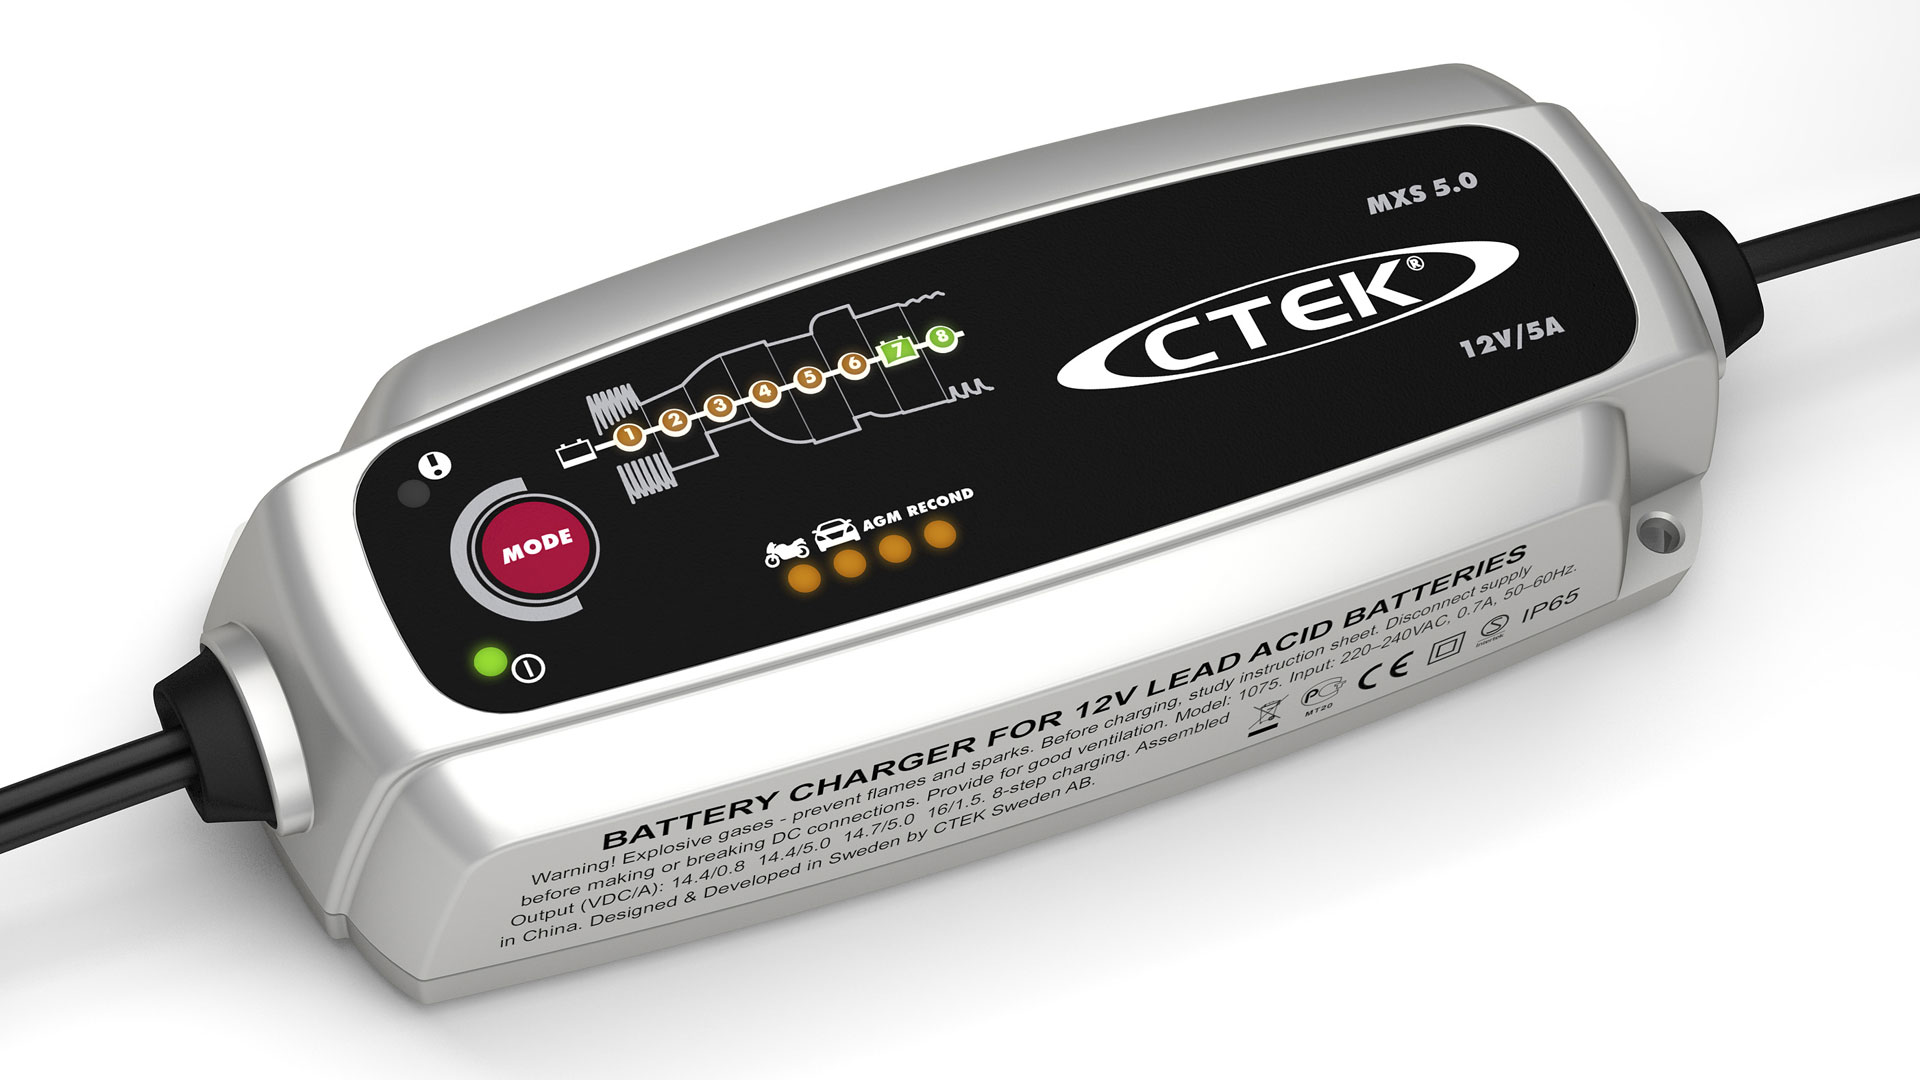 CTEK XC 0.8 CARICABATTERIA CHARGER 6v 0,8a xc800 PER MOTO NUOVO 